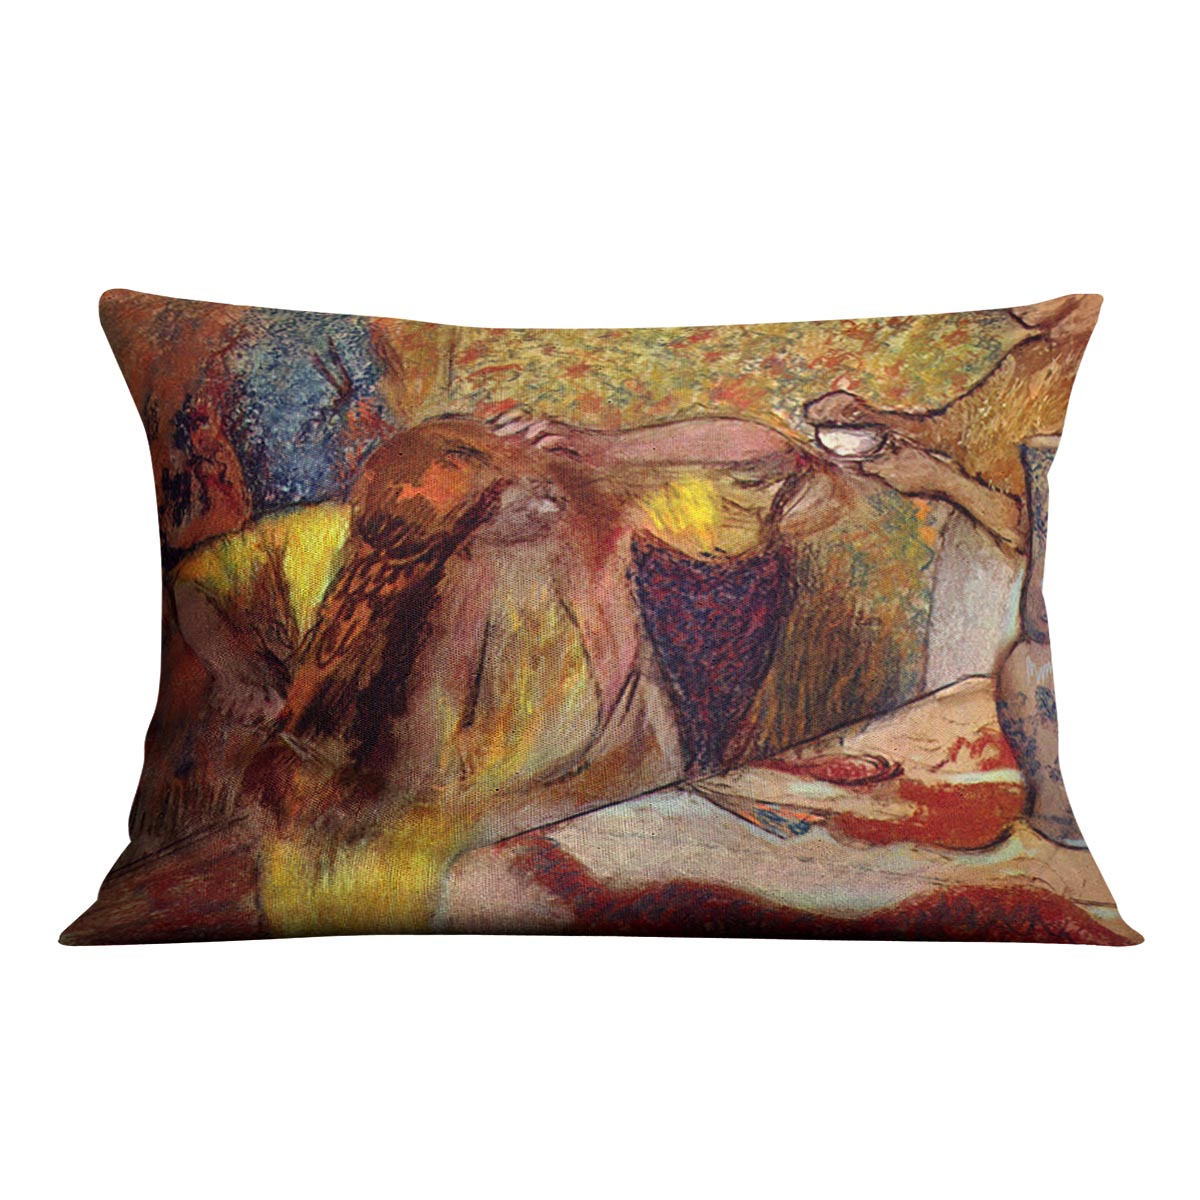 Women at the toilet 1 by Degas Cushion